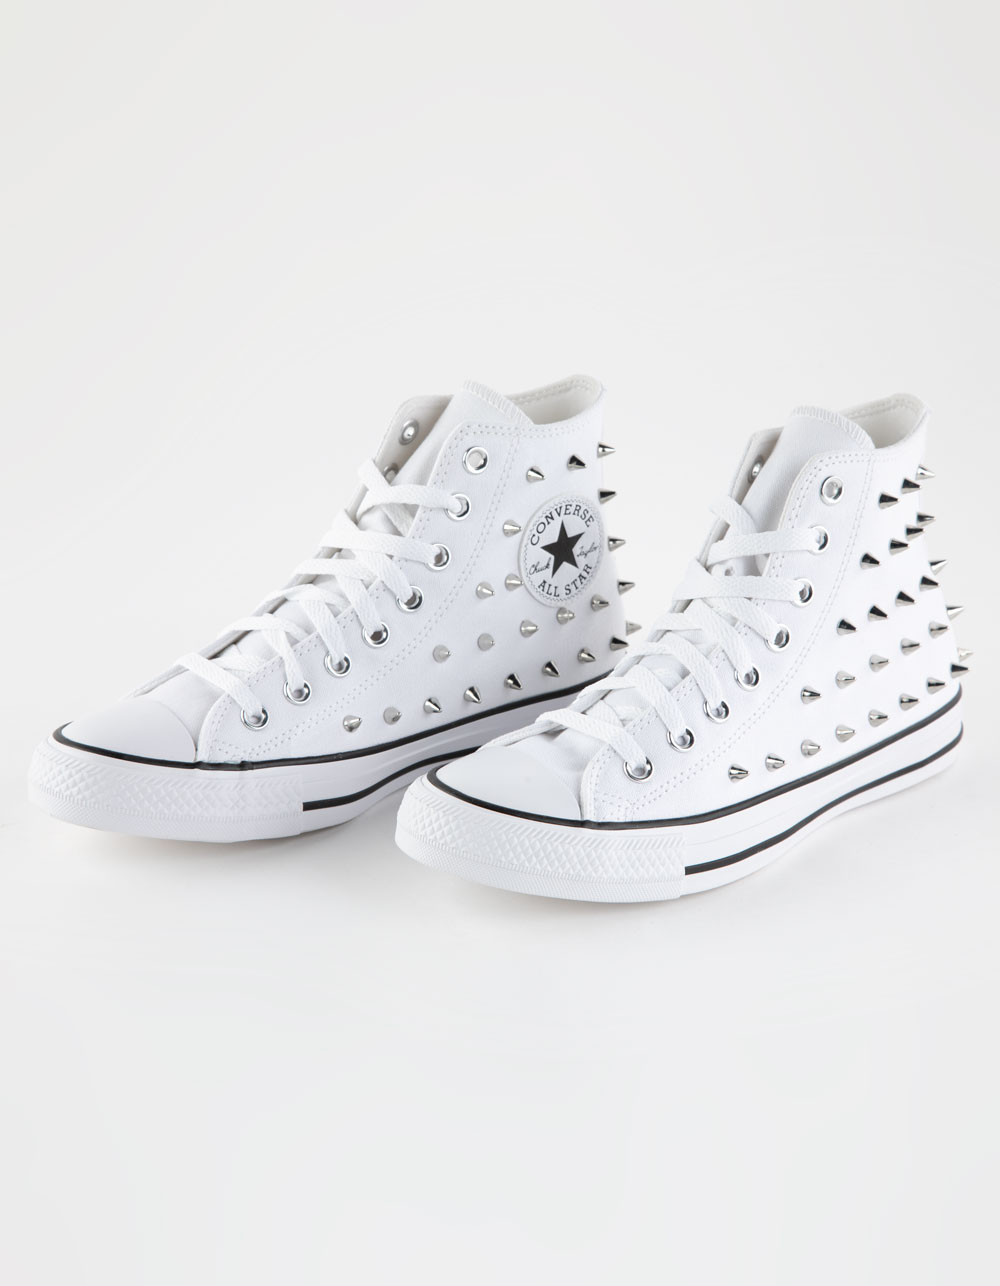 CONVERSE Chuck Taylor All Star Studded Womens High Top Shoes